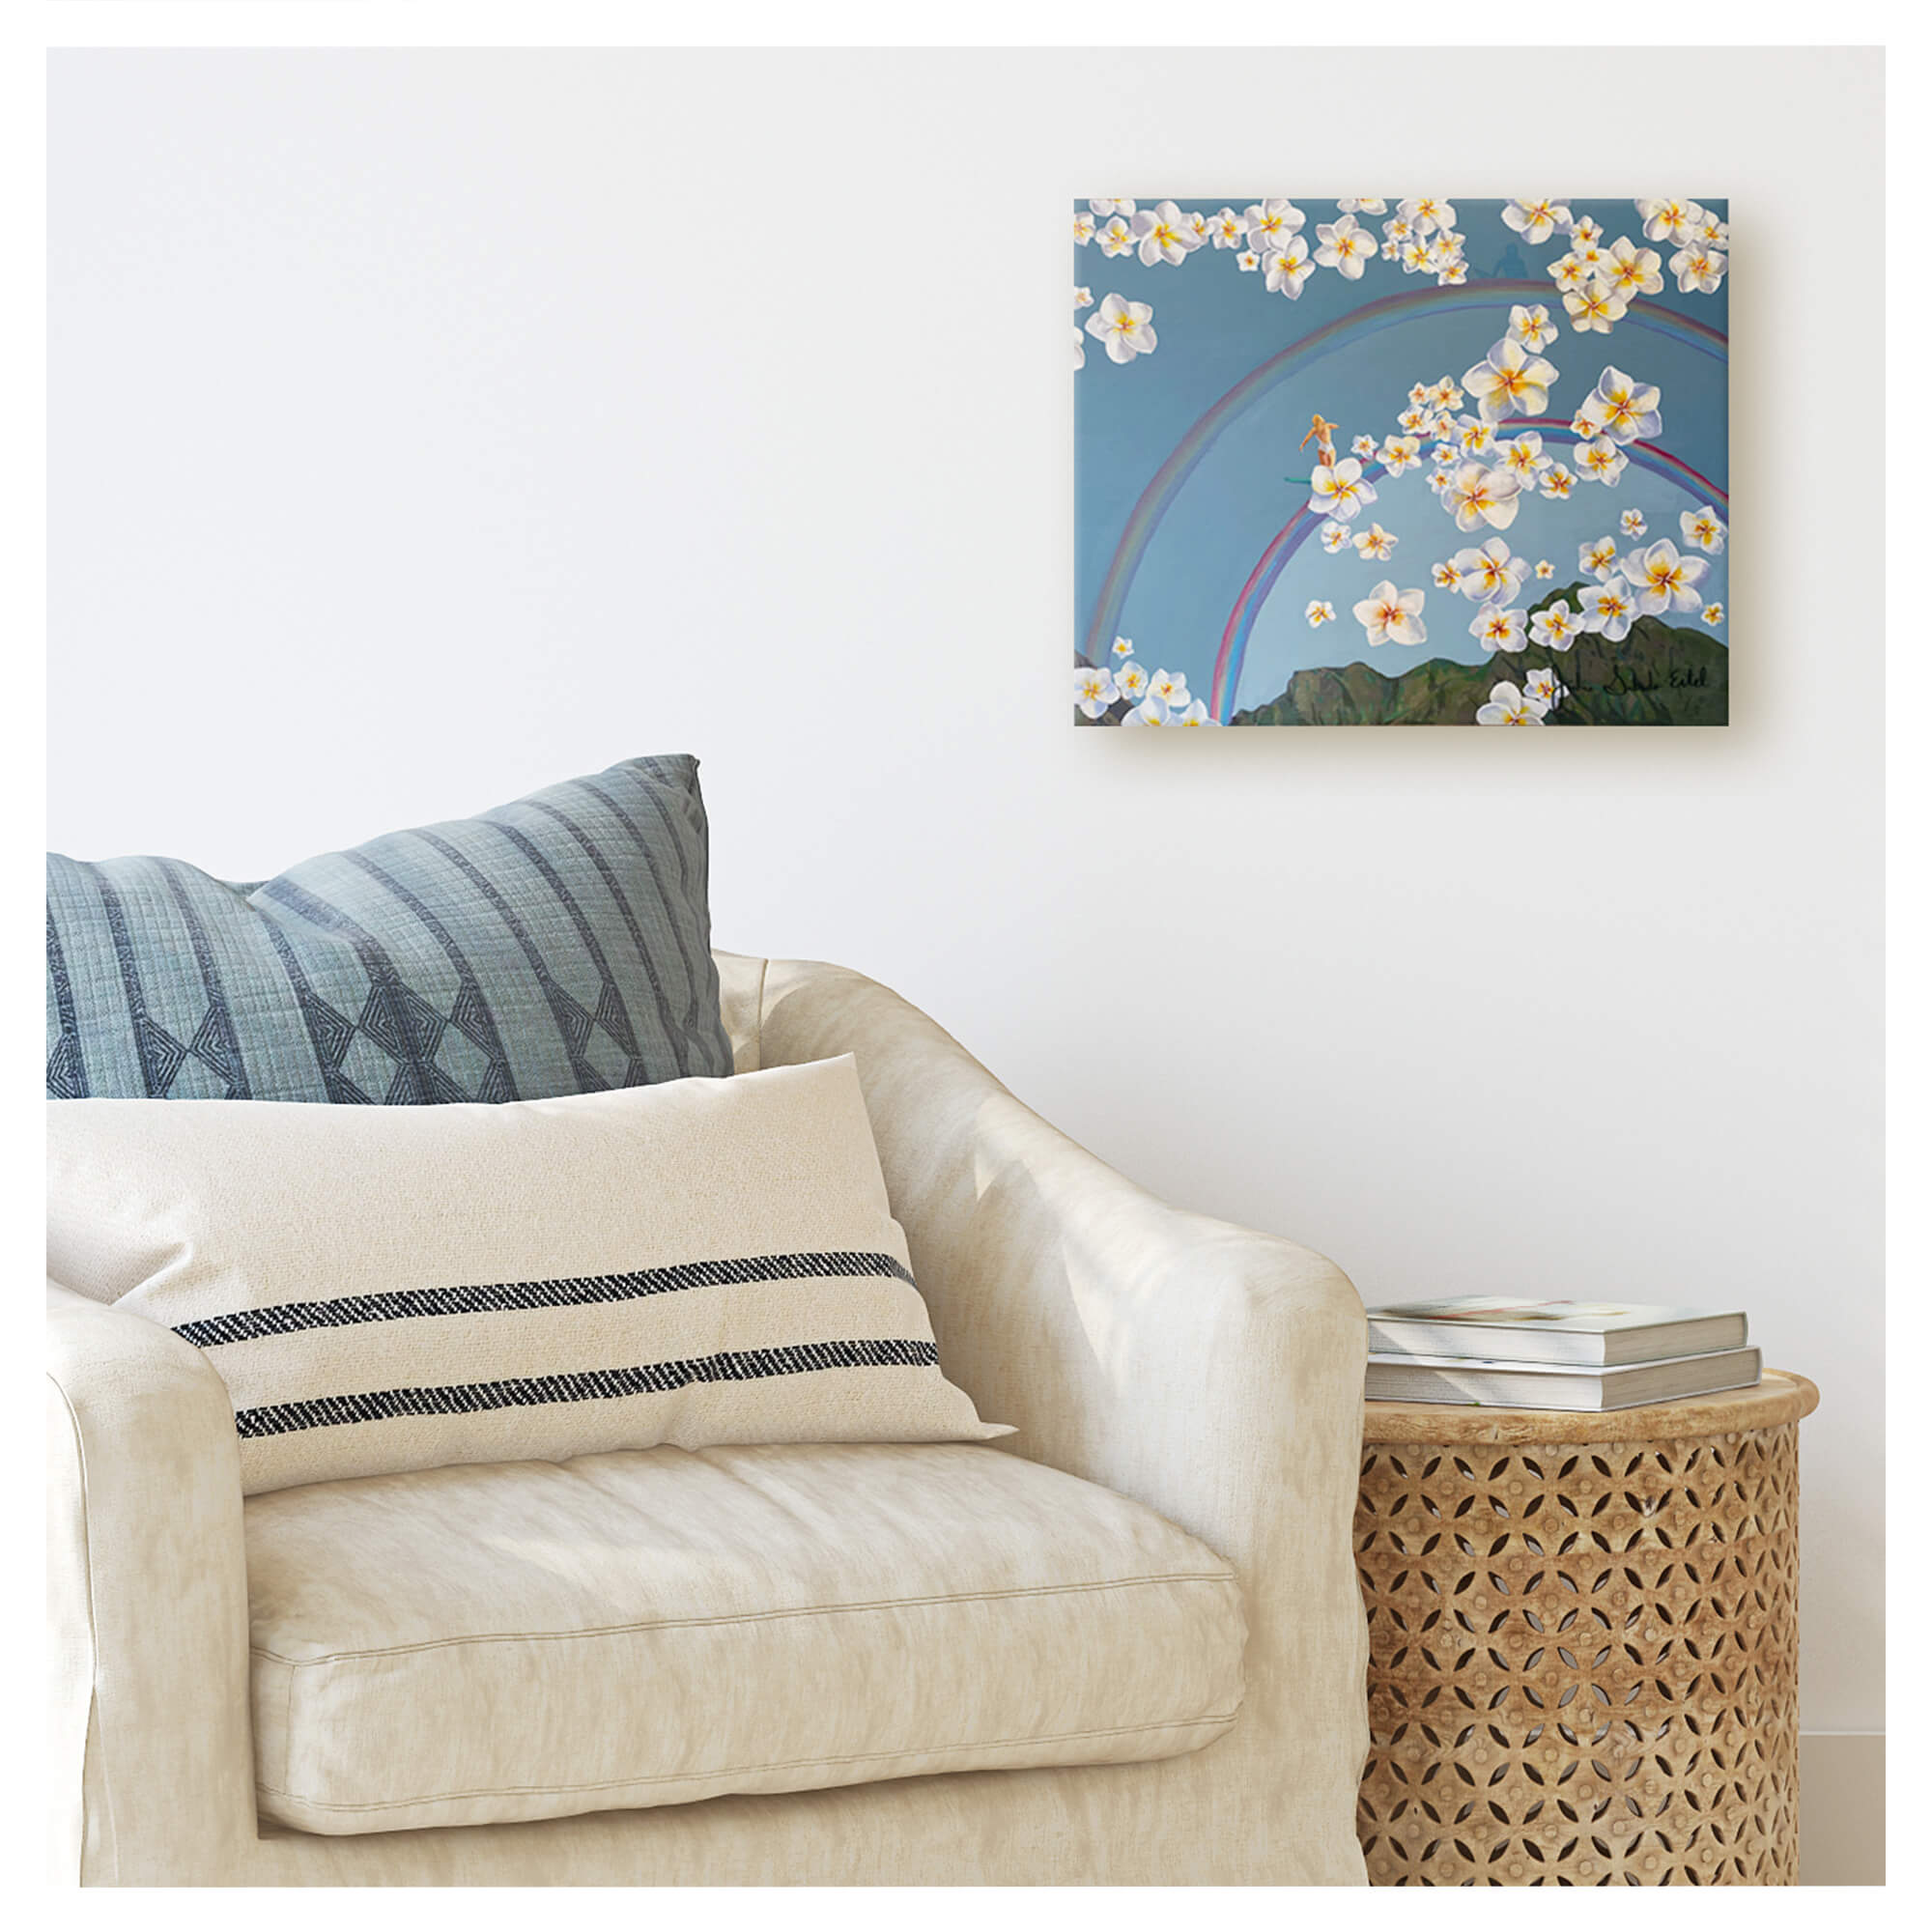 A canvas giclée print featuring a woman surfing on a rainbow above the mountains of Hawaii framed by plumeria flowers by Hawaii artist Jackie Eitel